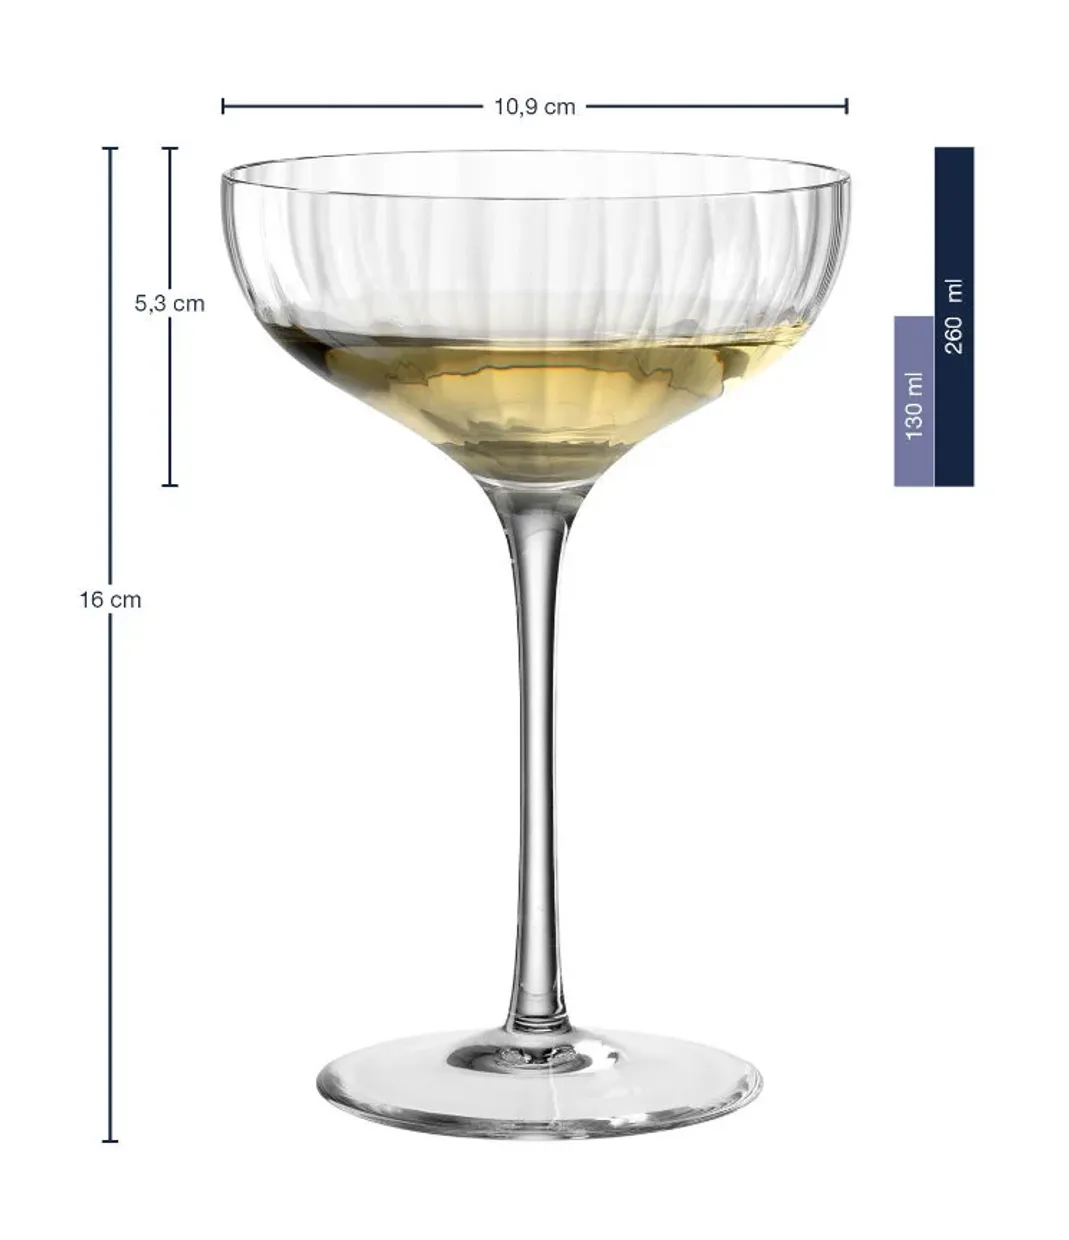 Champagne Coupe 260 ml - Poesia